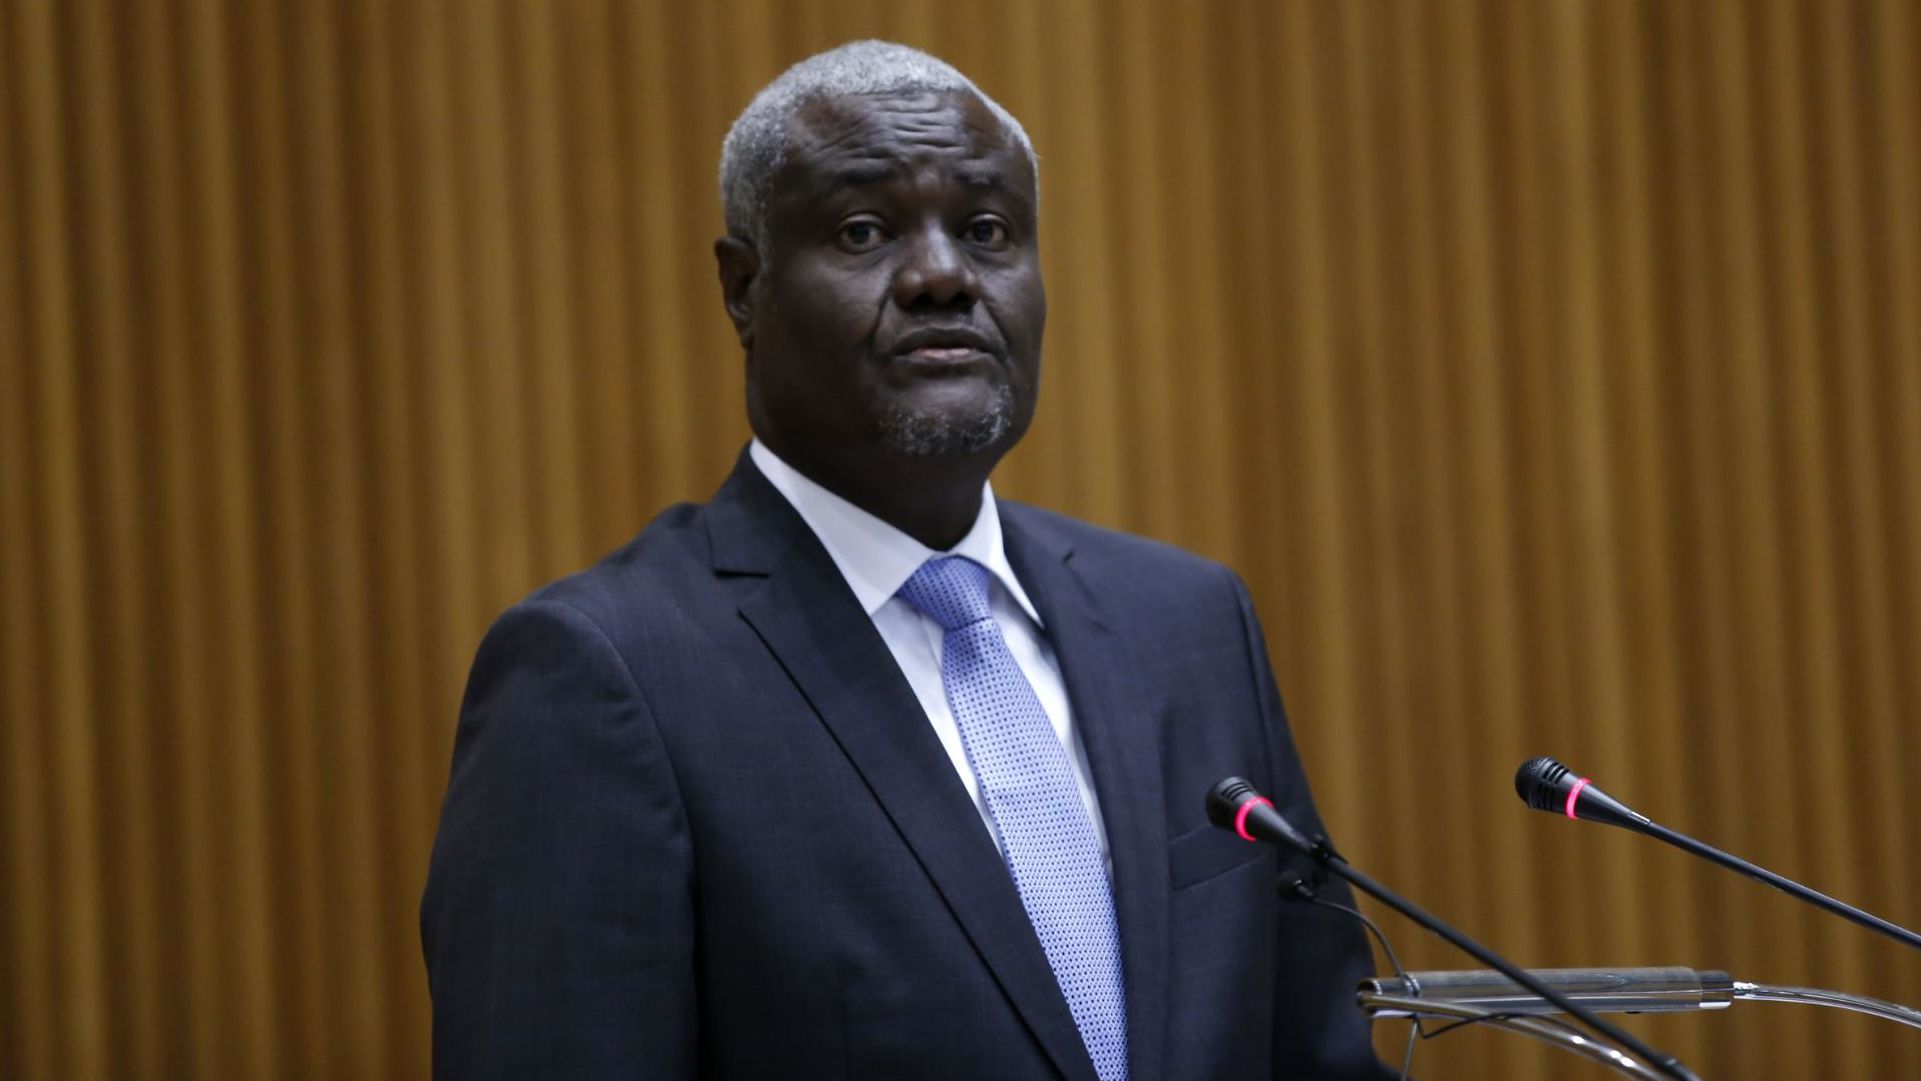 Moussa Faki Mahamat, the chairman of the African Union Commission, pictured in February 2020.